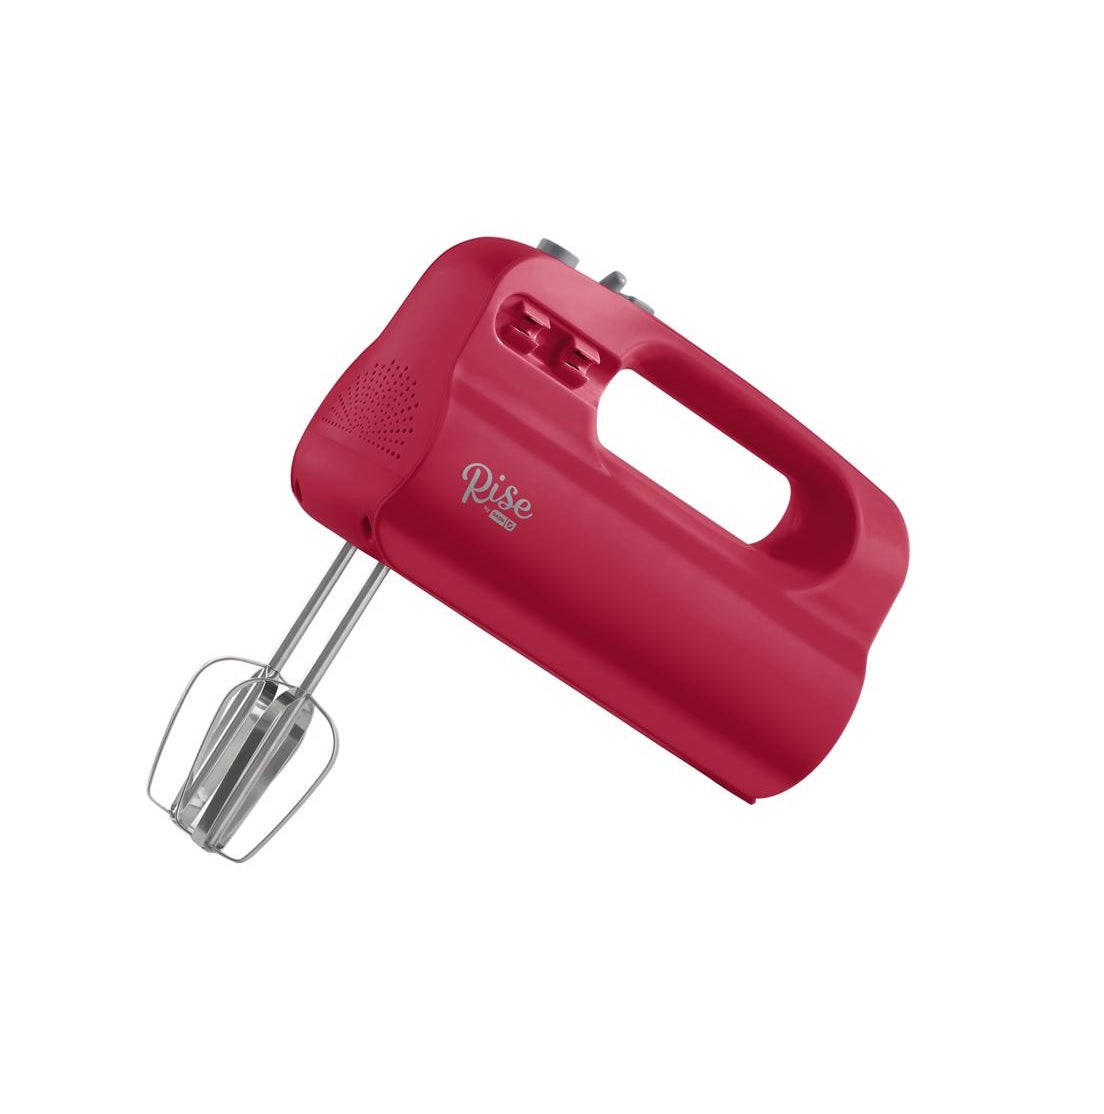 Rise by Dash RHM100GBRR04 Hand Mixer, Red